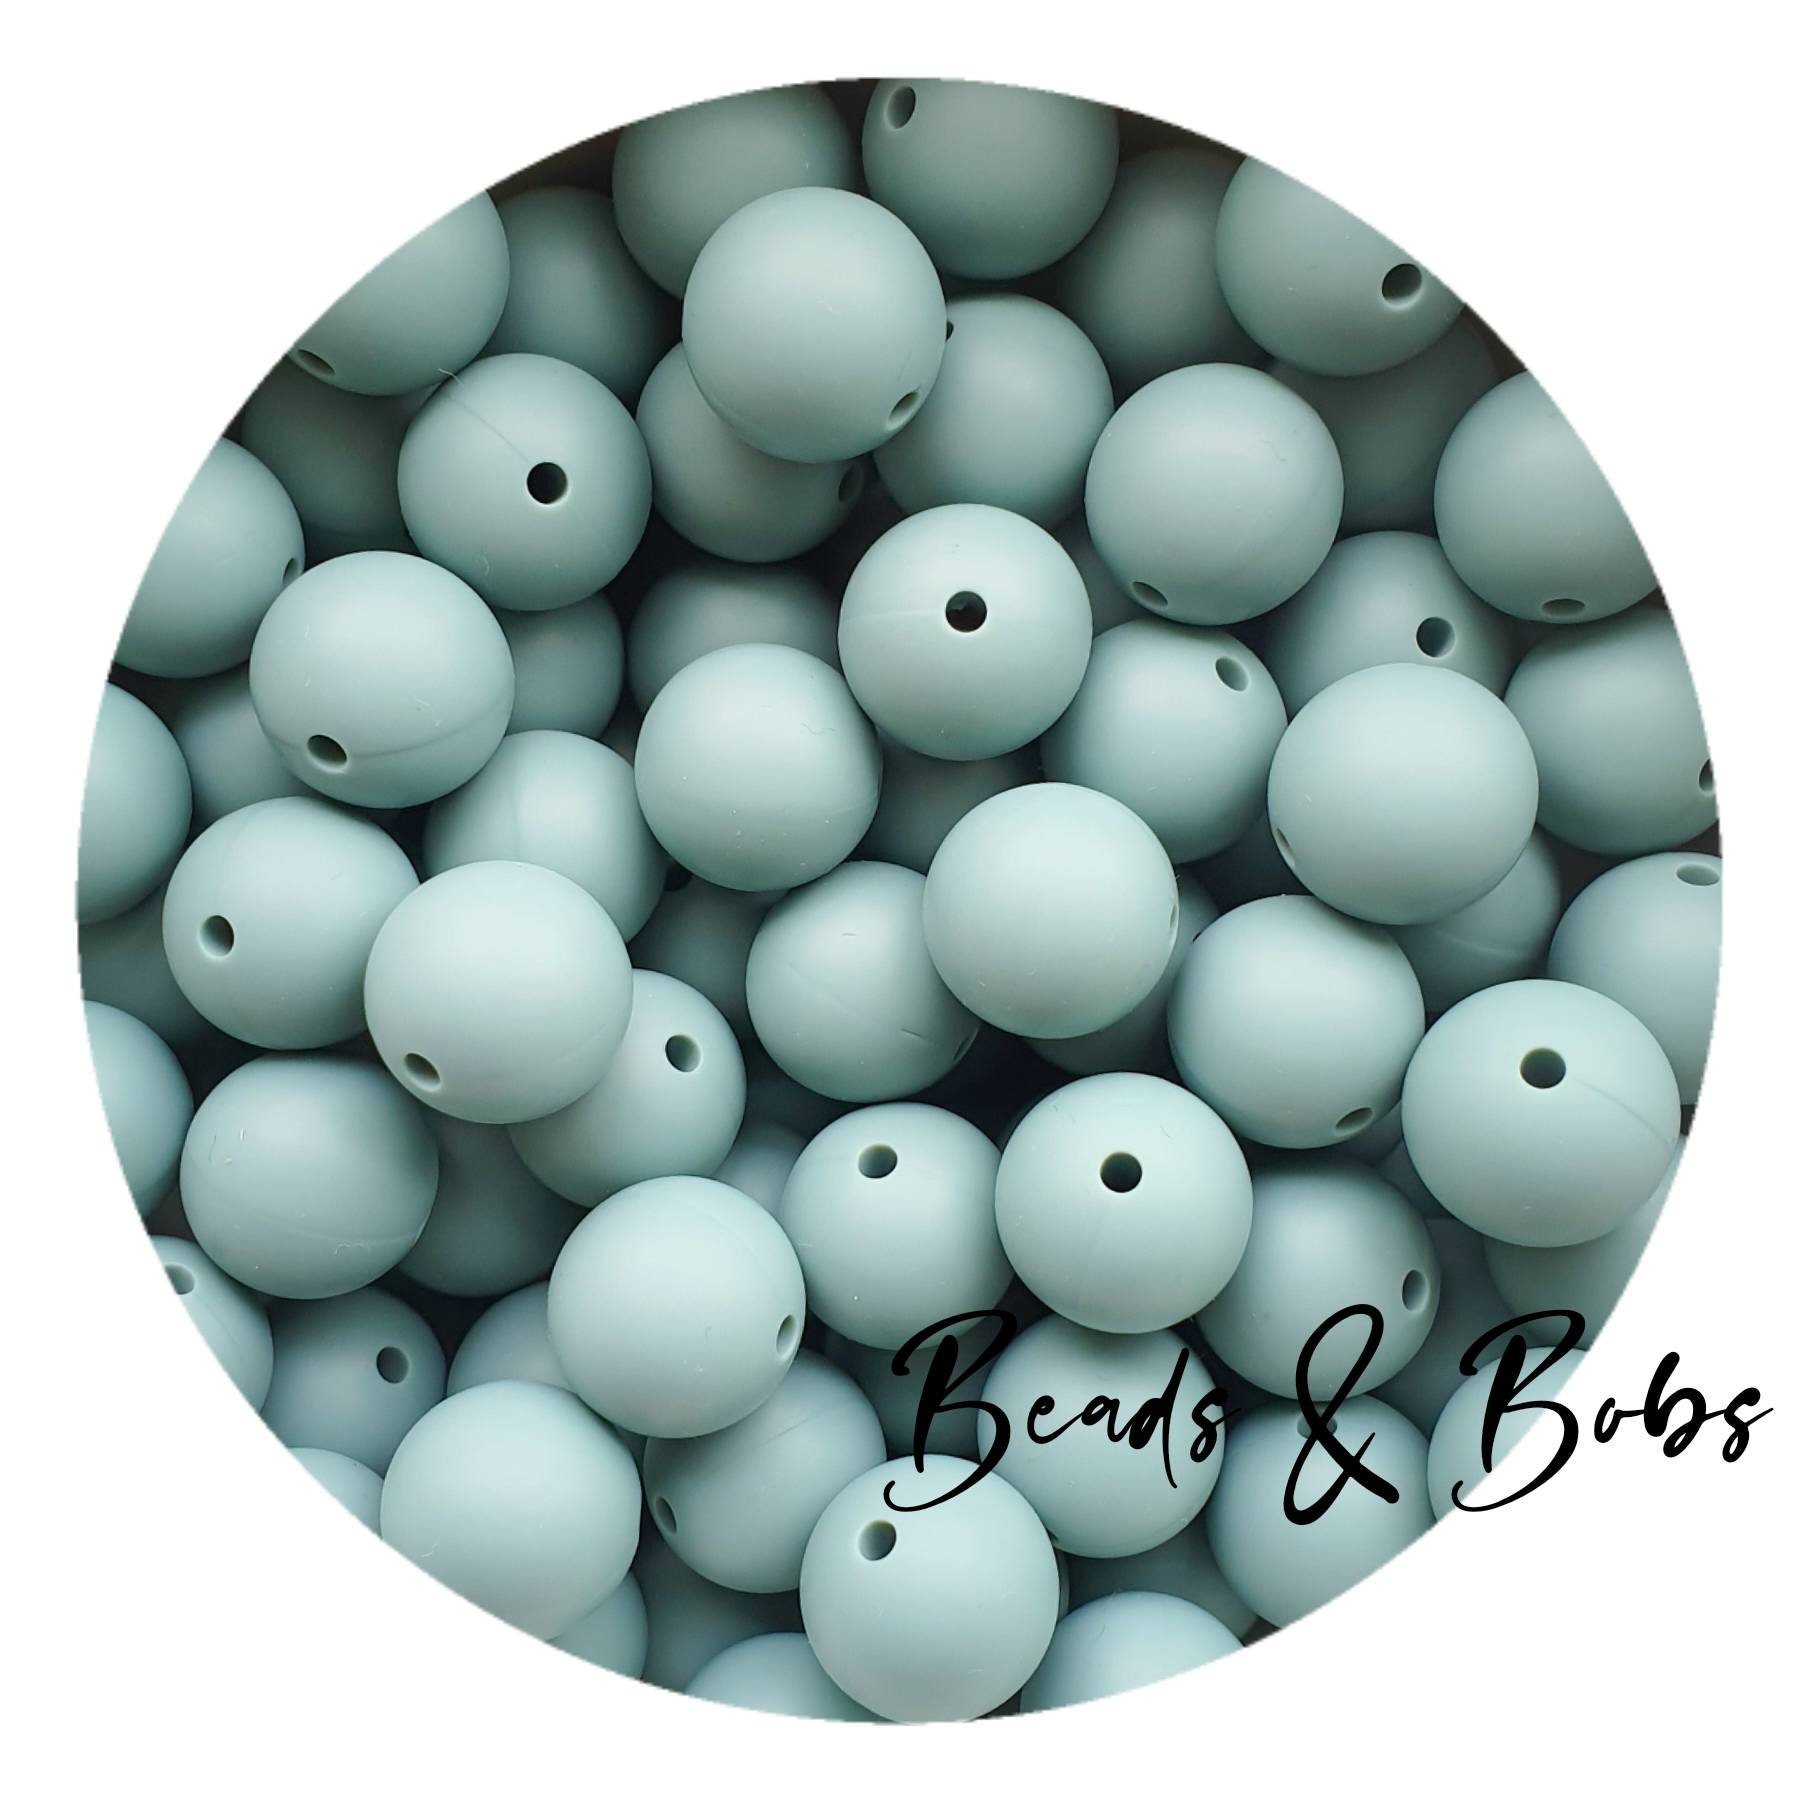 15mm 660 Silicone Beads Bulk Kit Silicone Beads for Keychain